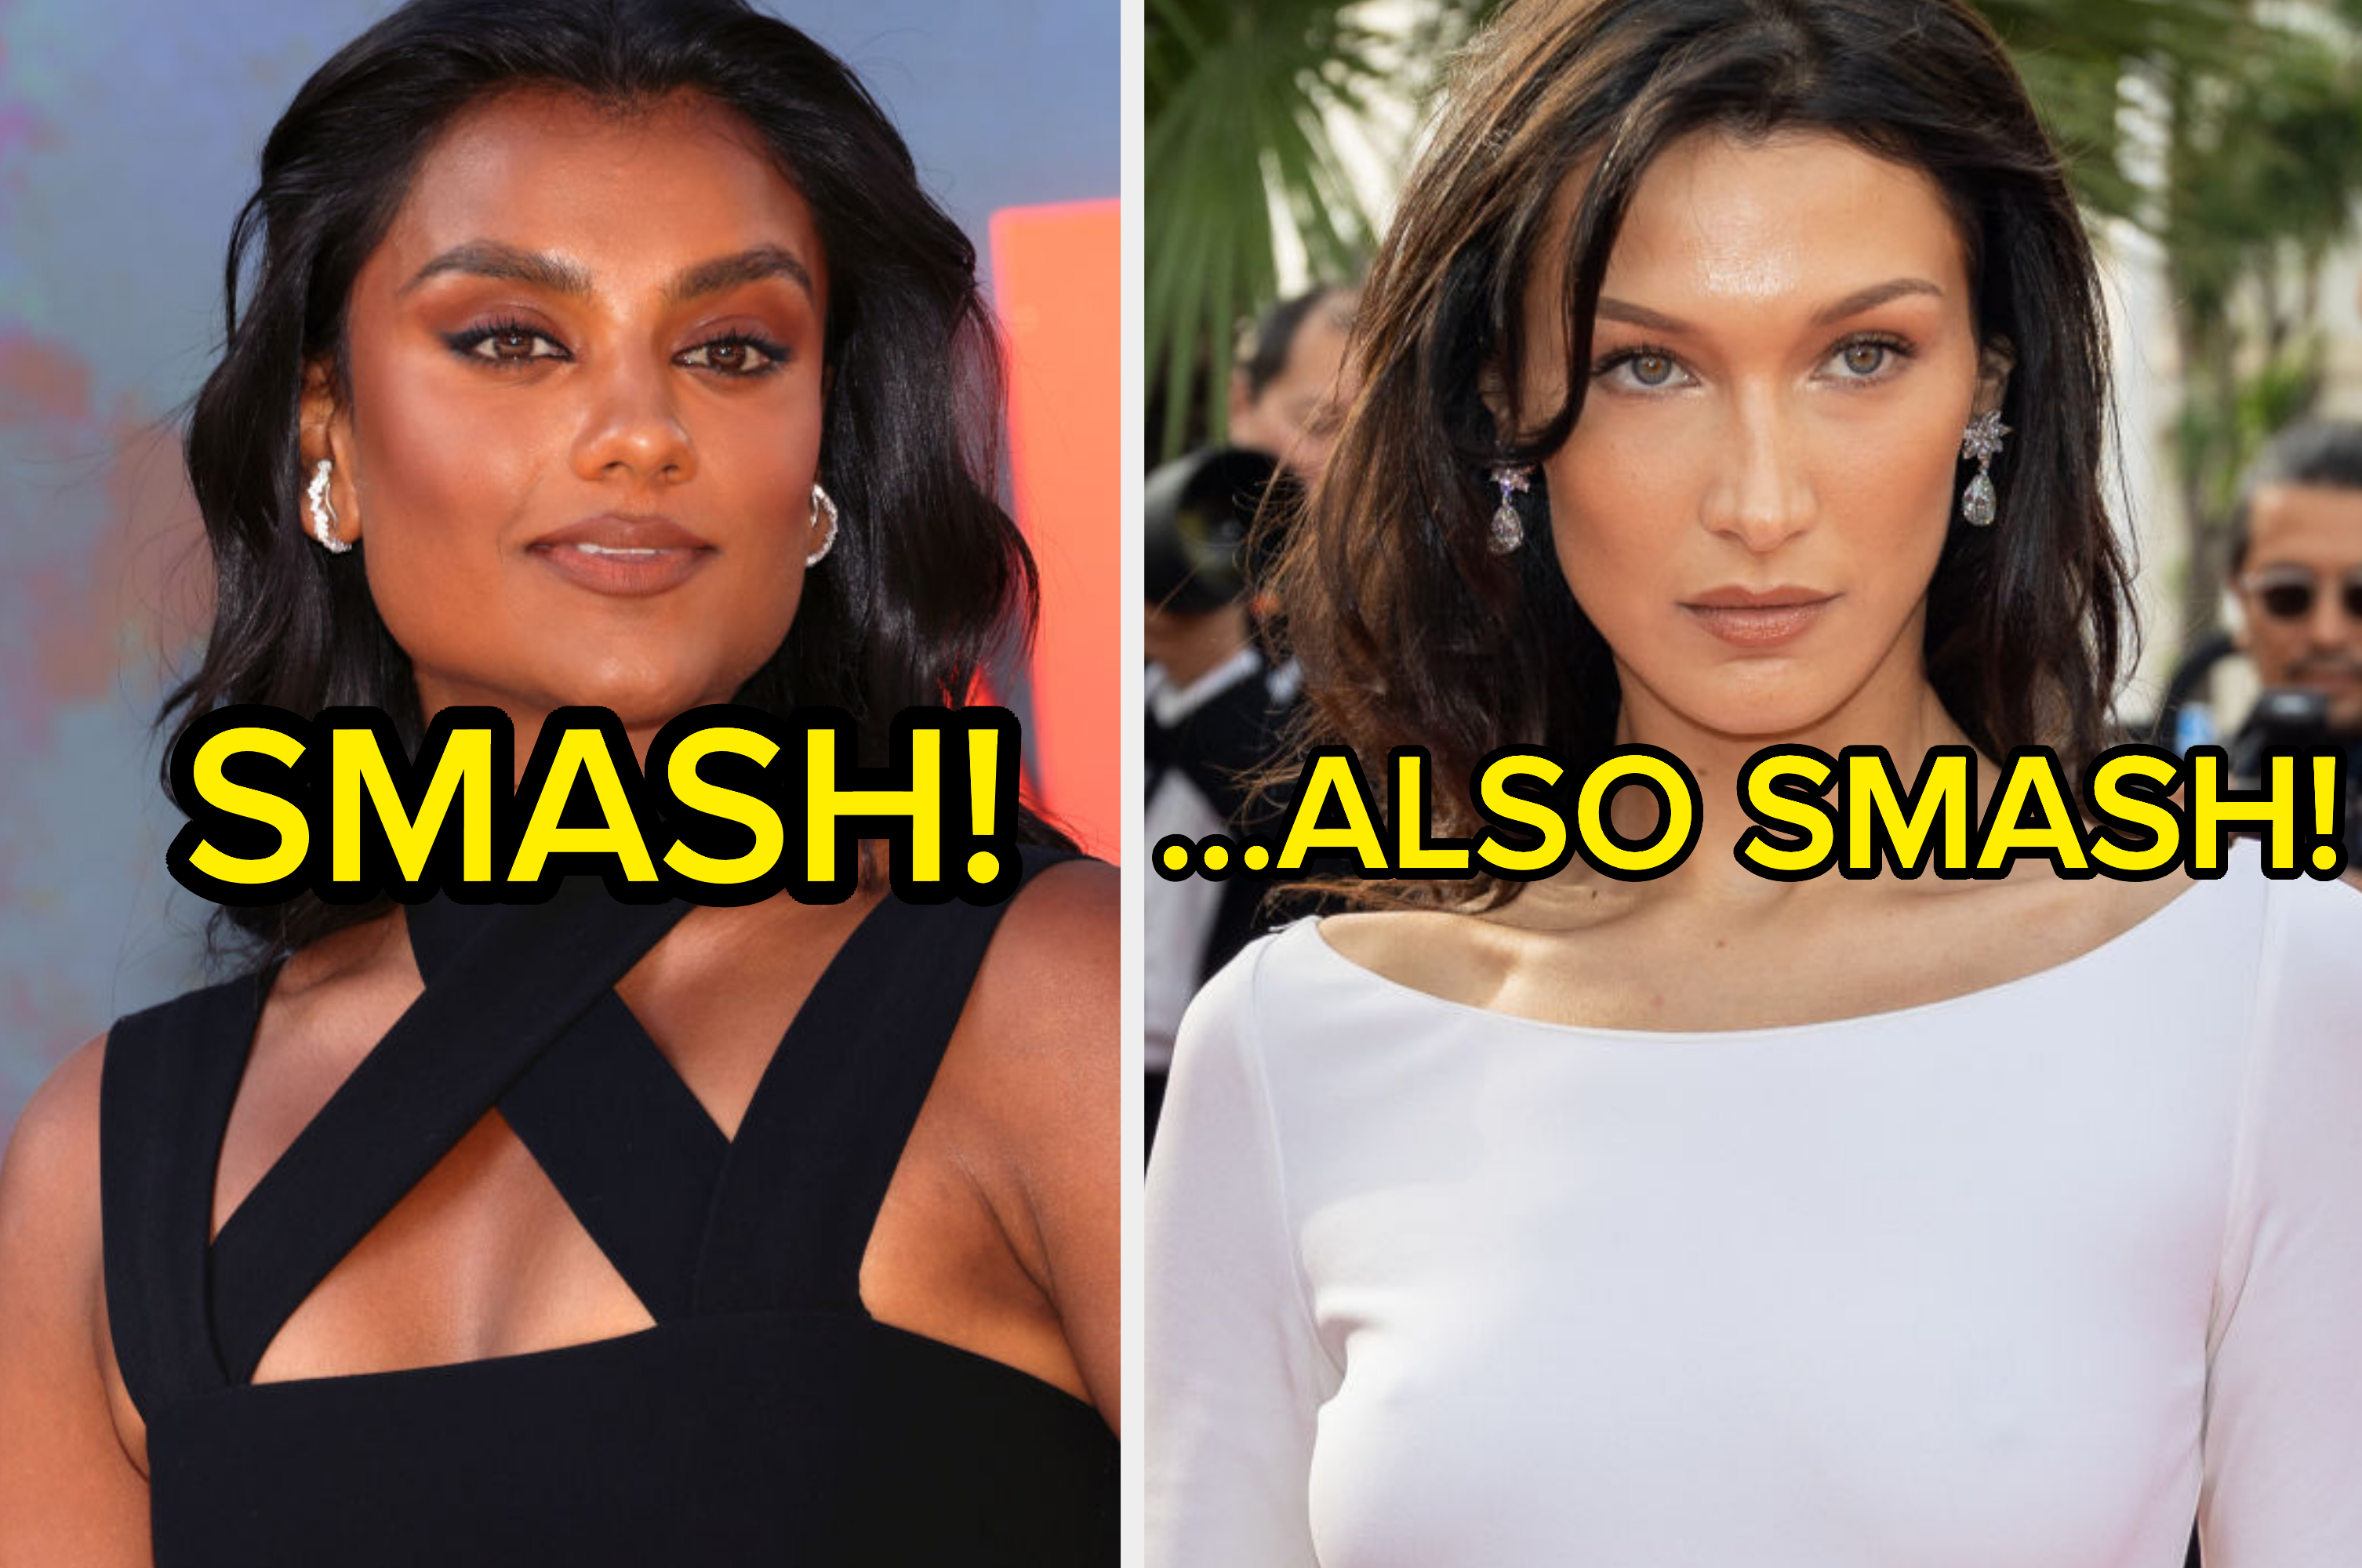 Play 'Smash Or Pass' With These TV Beauties And We'll Guess Your Type